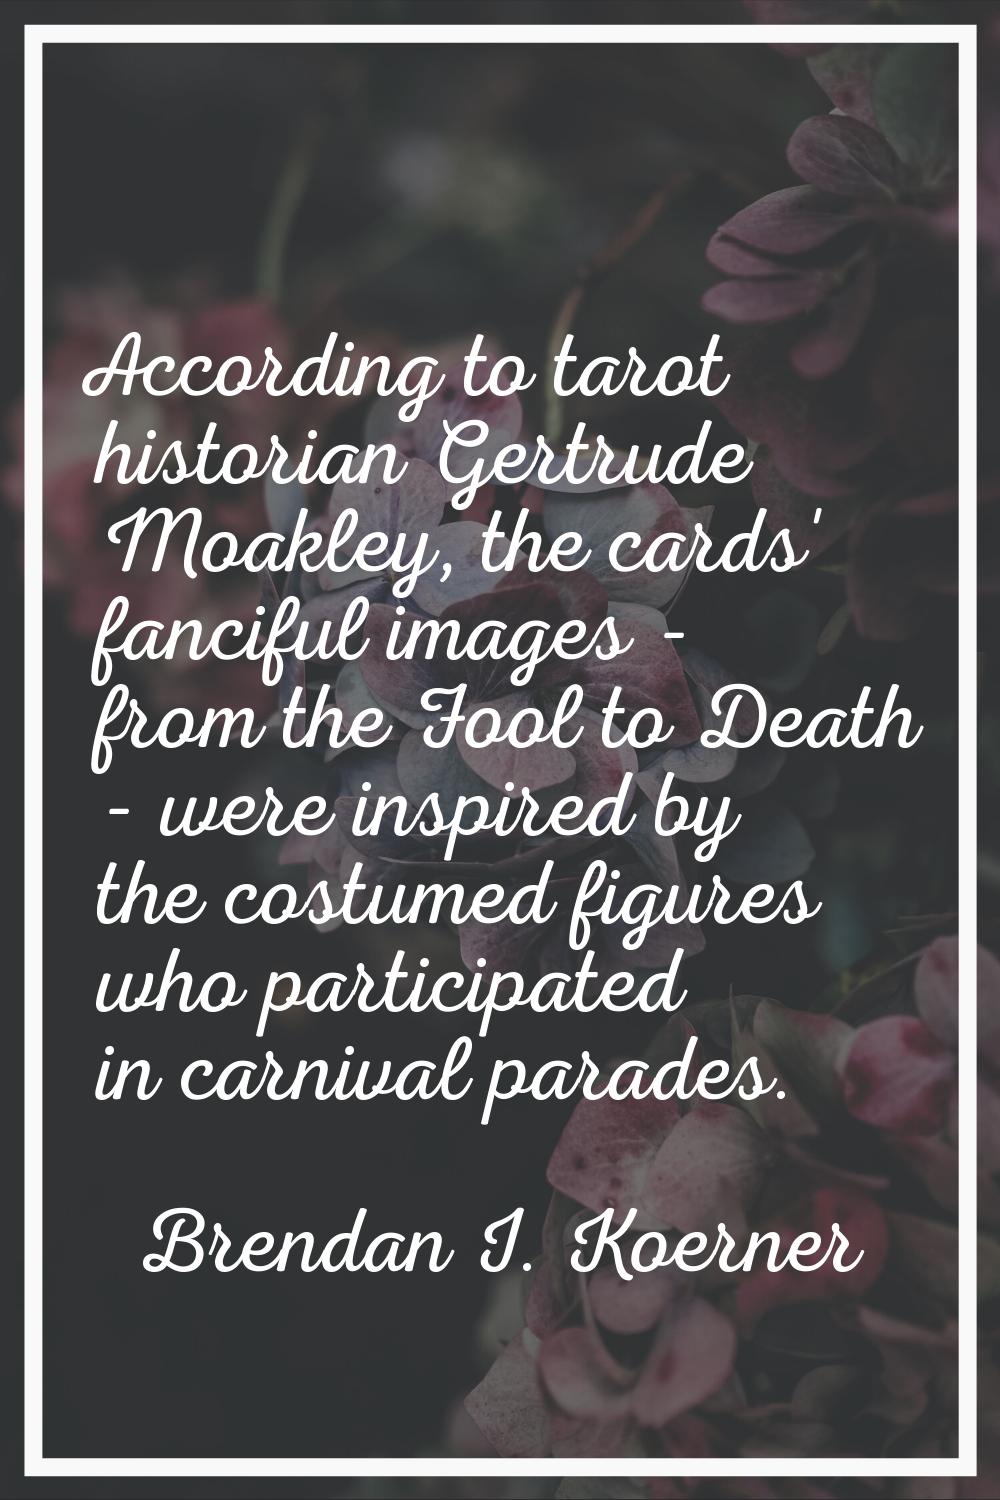 According to tarot historian Gertrude Moakley, the cards' fanciful images - from the Fool to Death 